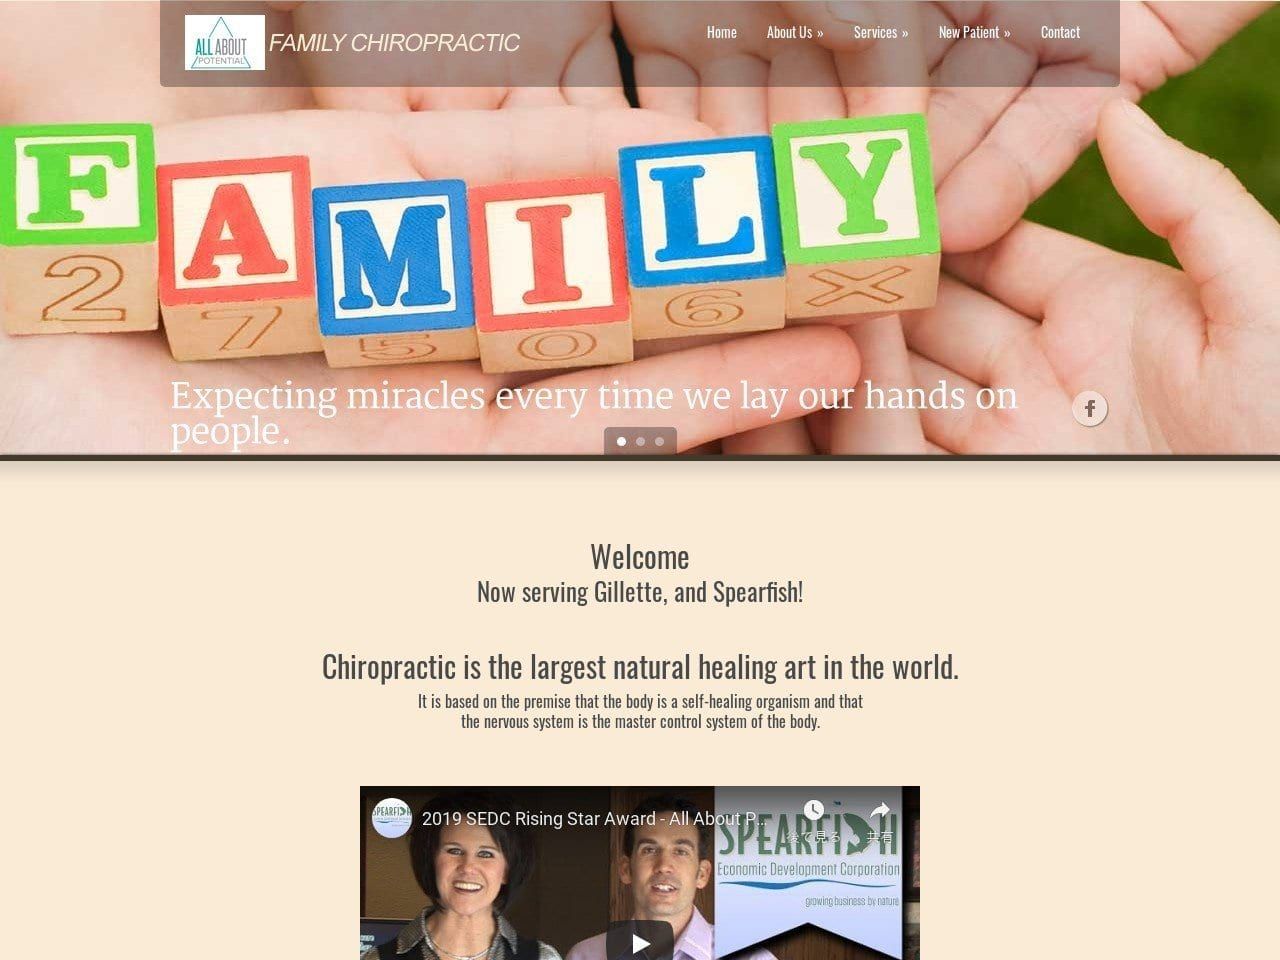 All About Potential Family Chiropractic PC Website Screenshot from allaboutpotential.com